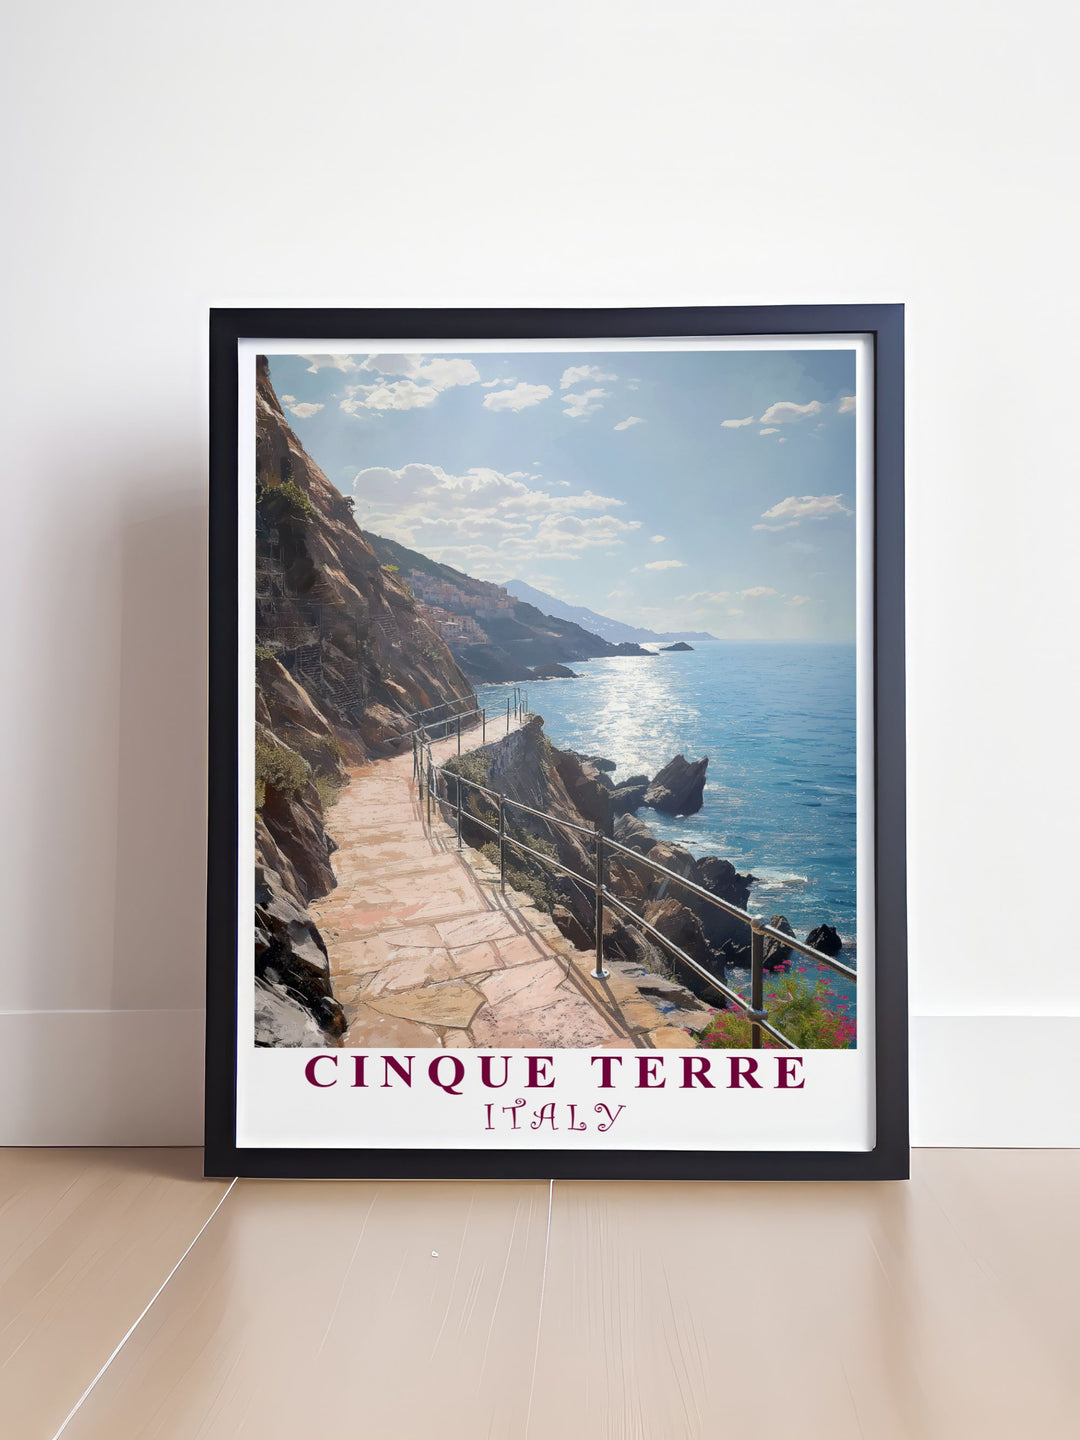 Vibrant Path of Love poster from Cinque Terre a beautiful addition to your home decor that captures the lively spirit and breathtaking views of this beloved Italian destination perfect for travel enthusiasts.